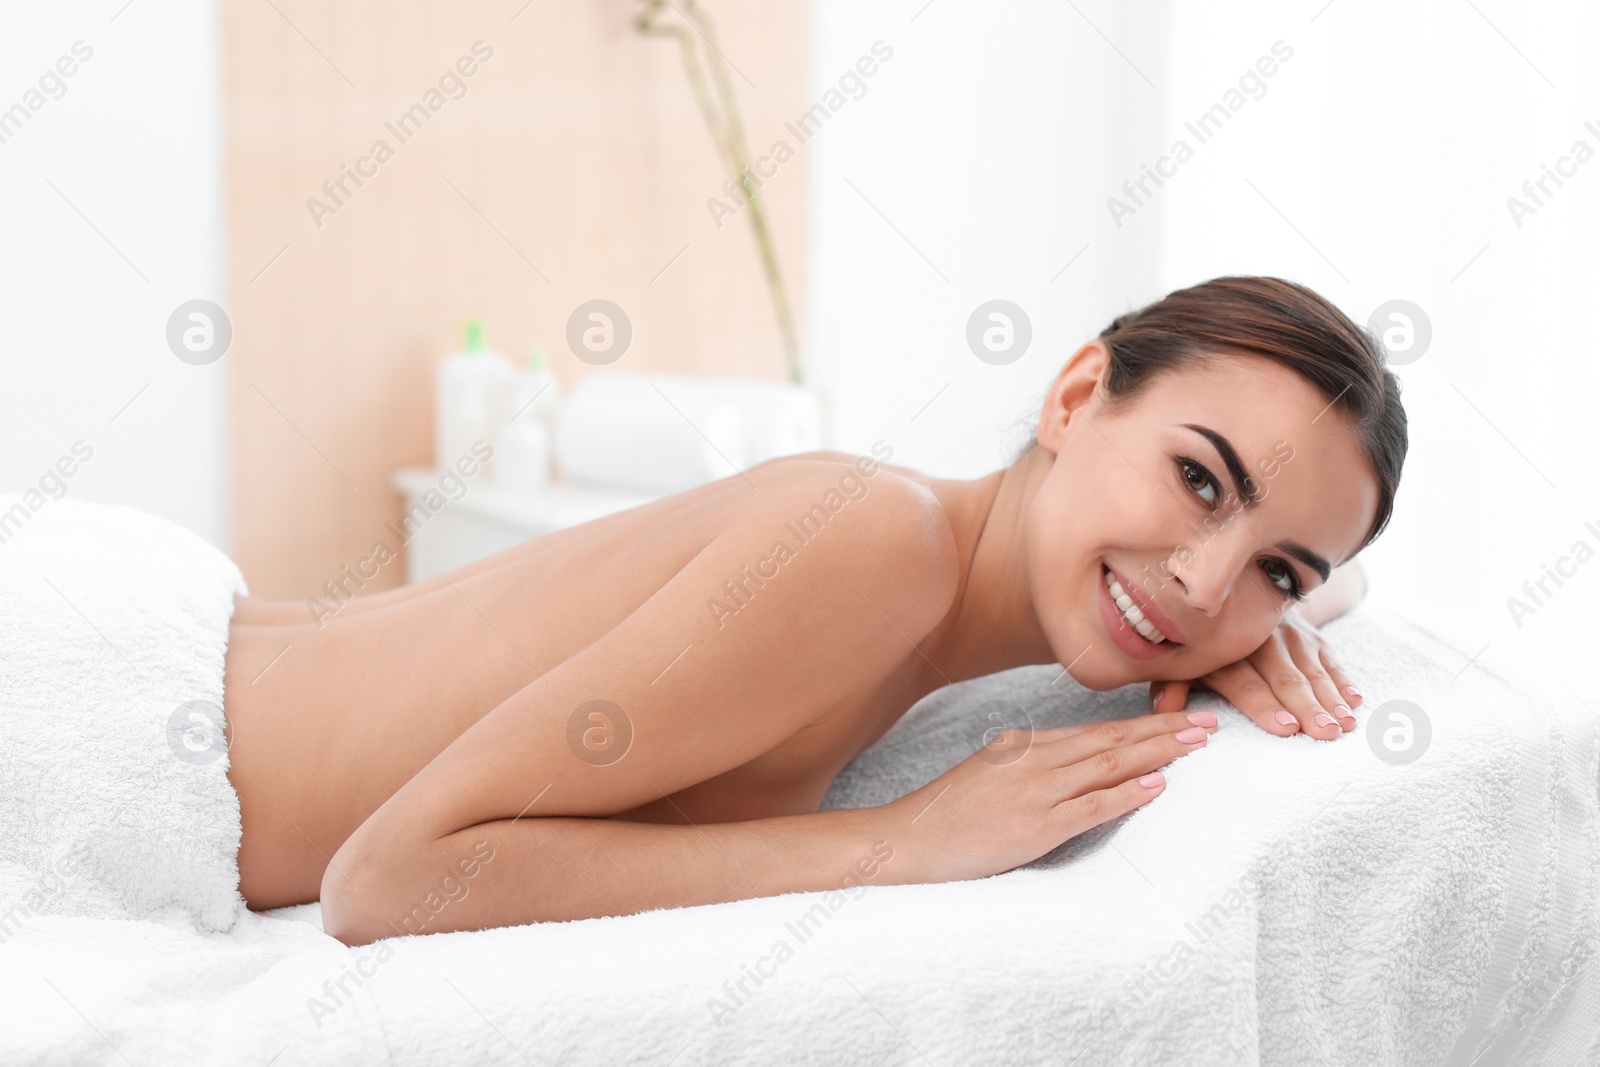 Photo of Beautiful young woman relaxing on massage table in spa salon